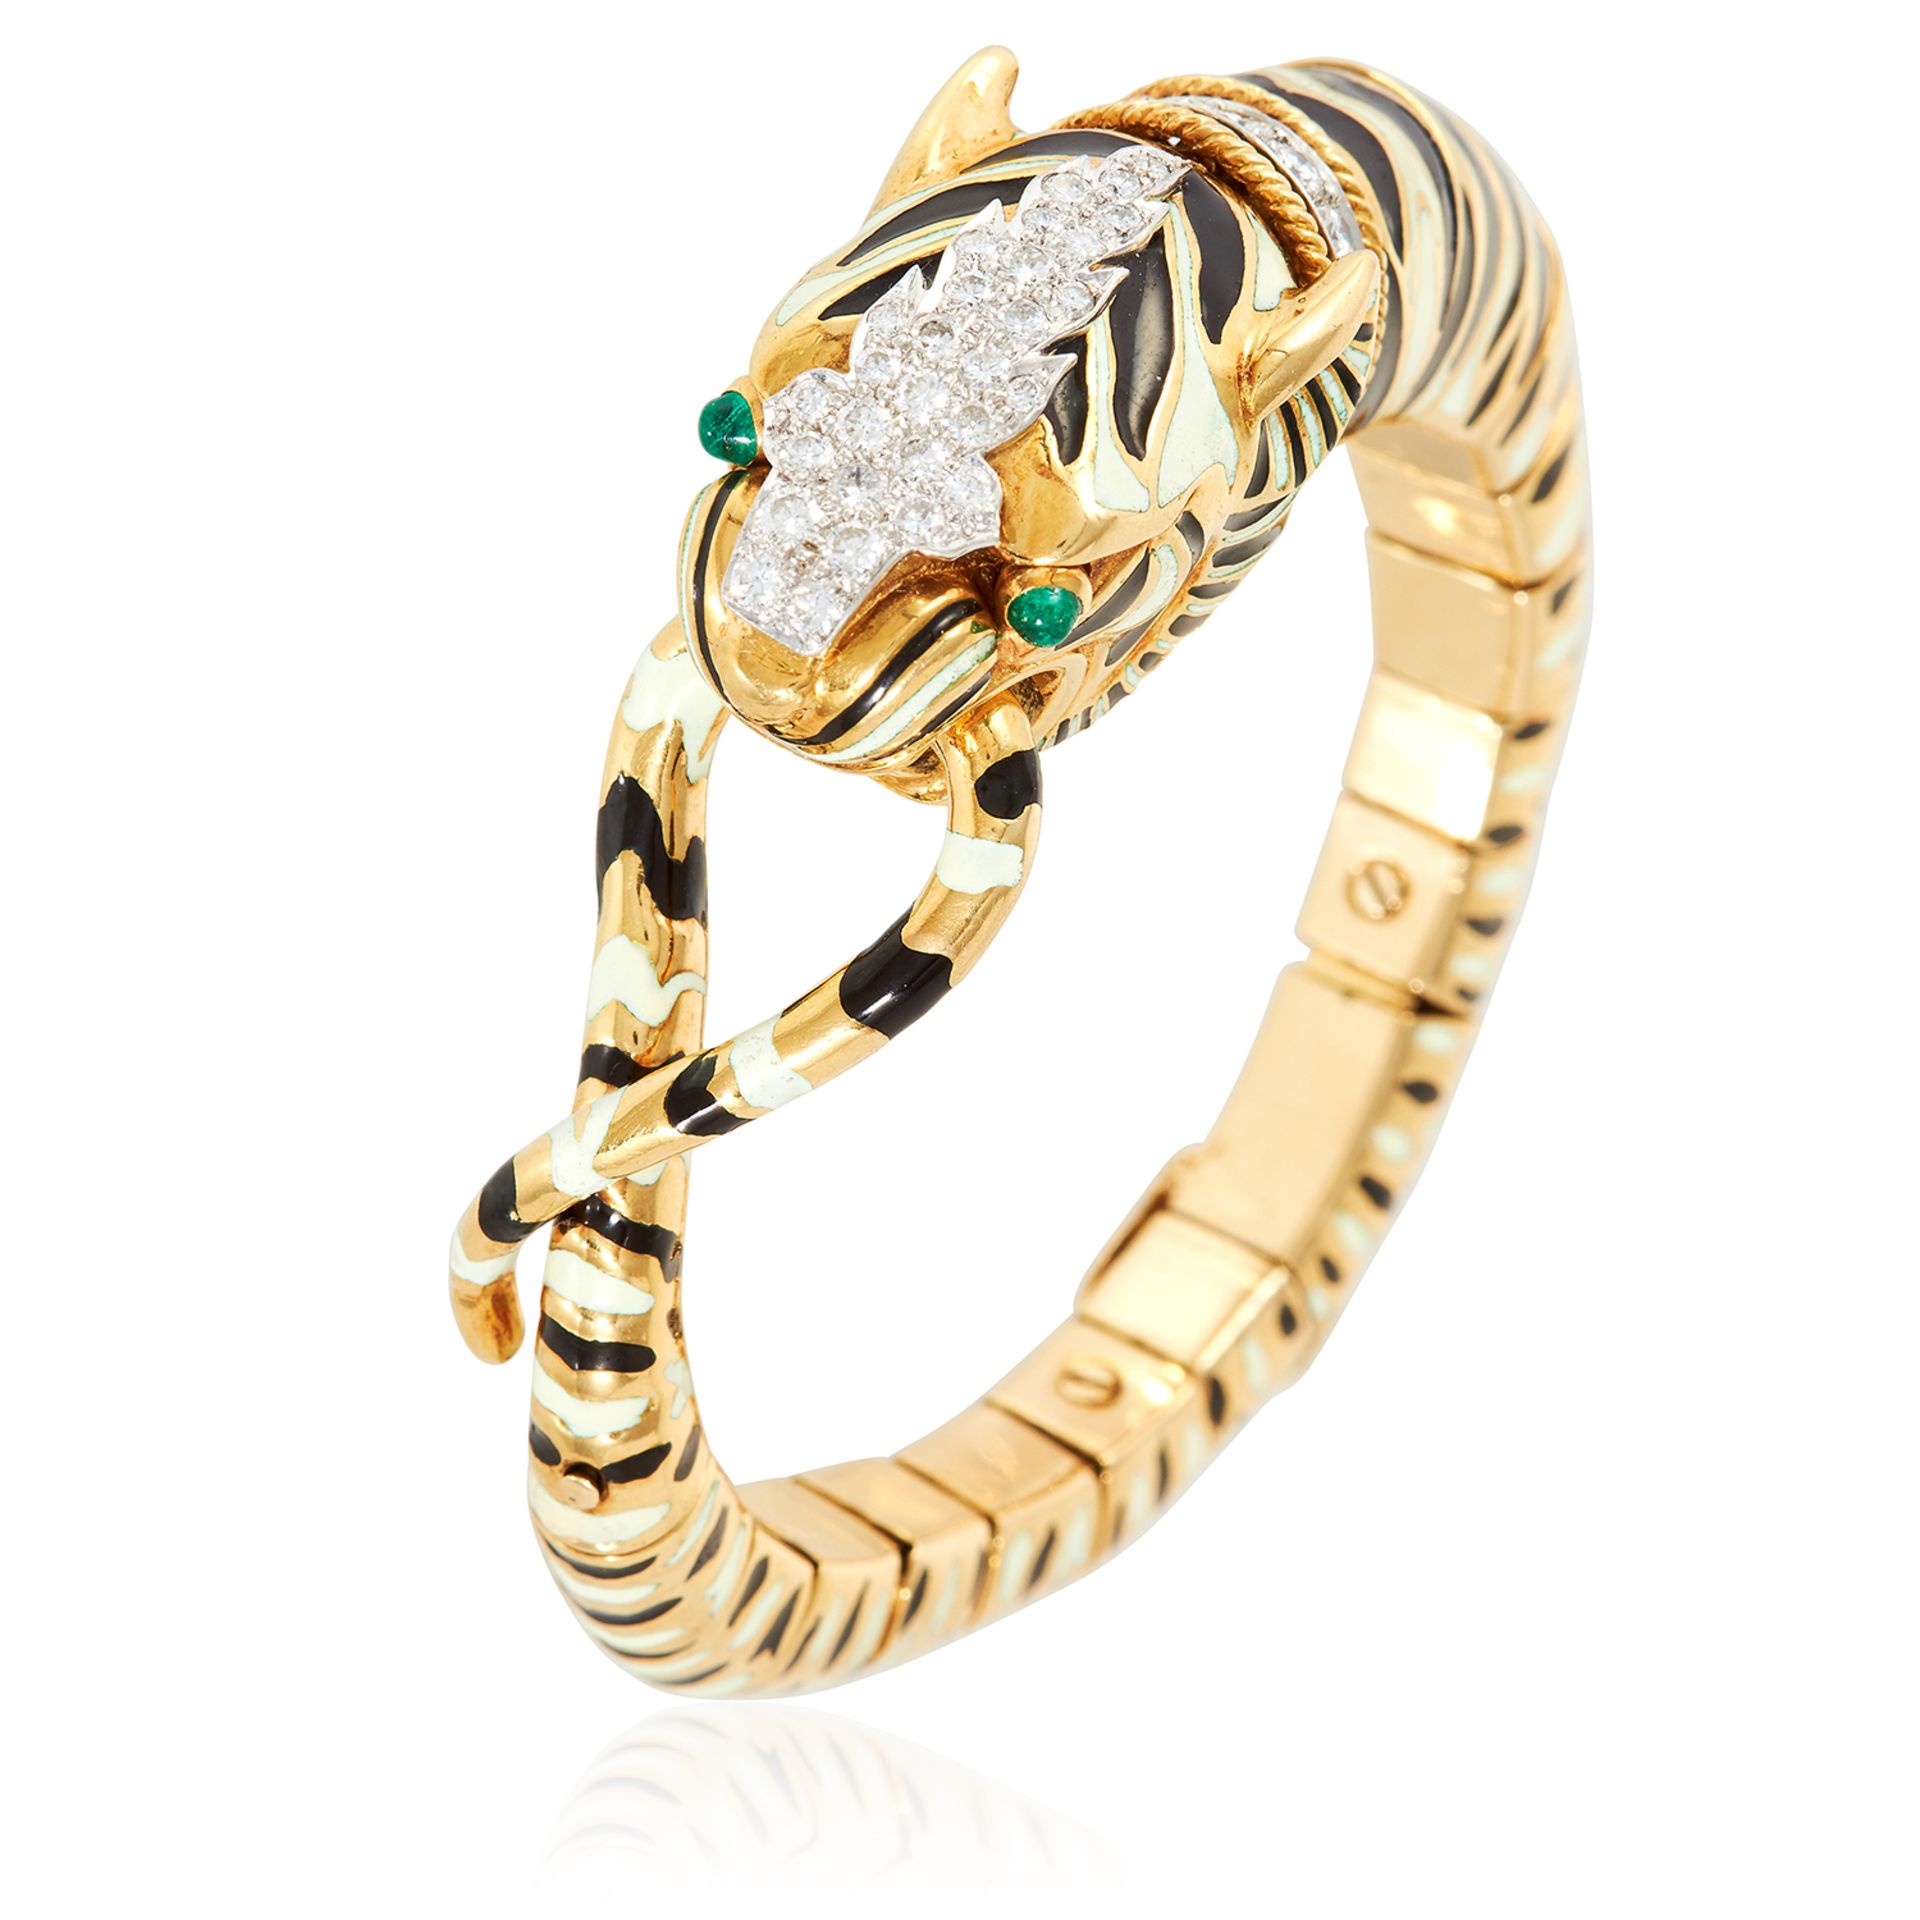 AN EMERALD, DIAMOND AND ENAMEL TIGER BRACELET in yellow gold, depicting a tiger enamelled in white